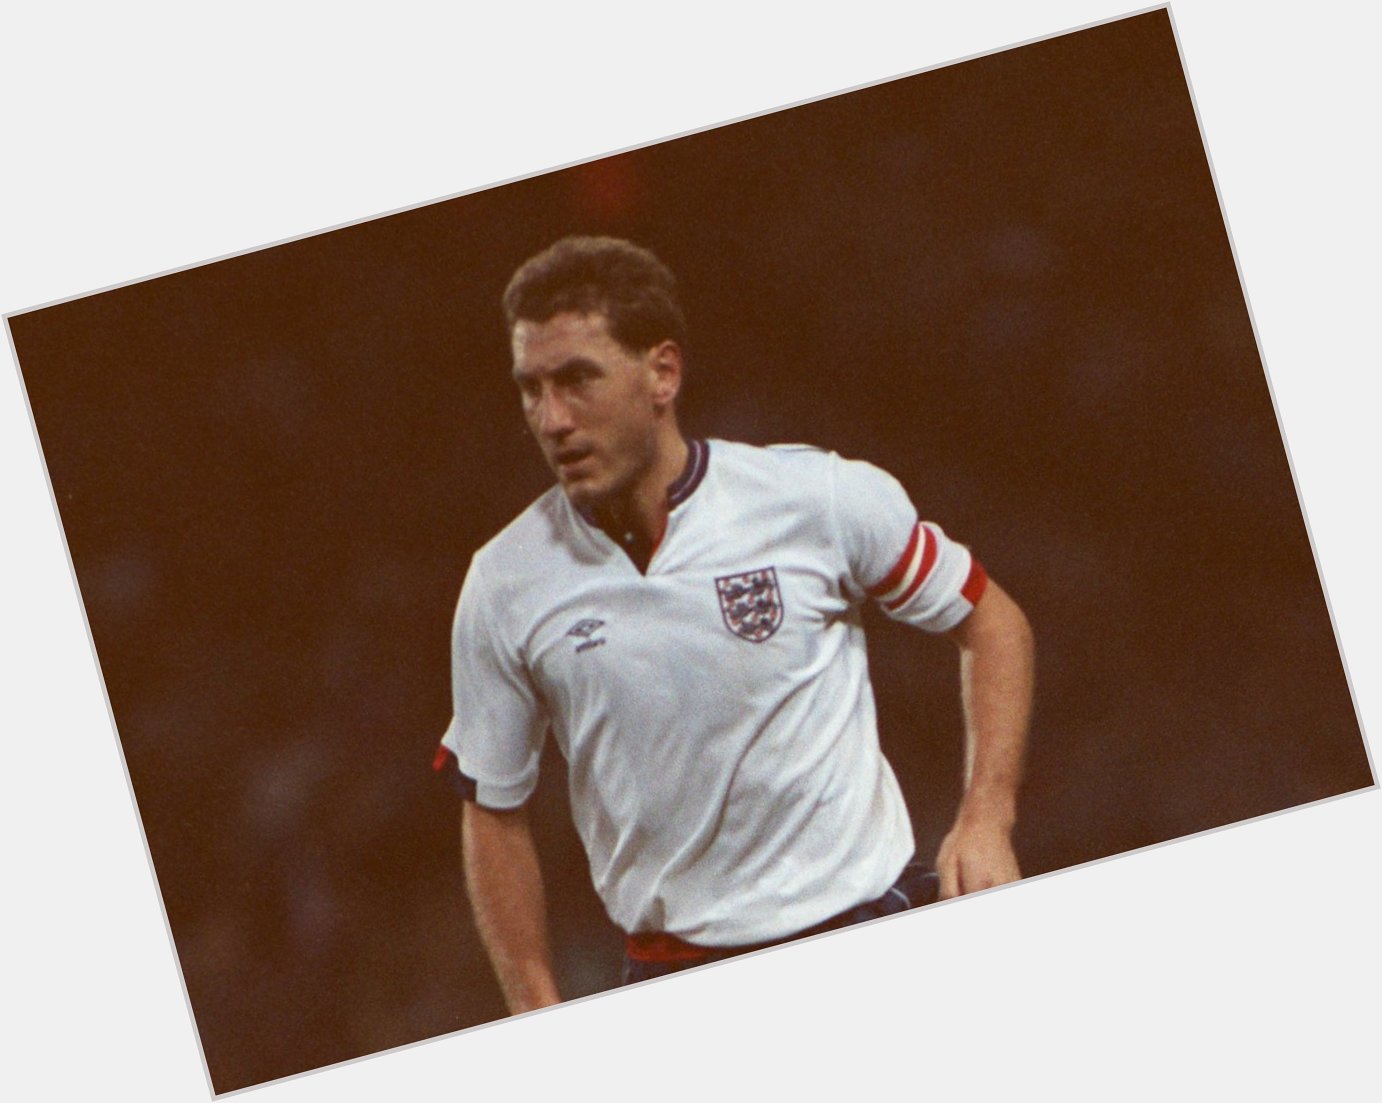 77 caps
3 goals
1 bloody headband

Happy birthday to one of England\s greats, Terry Butcher 